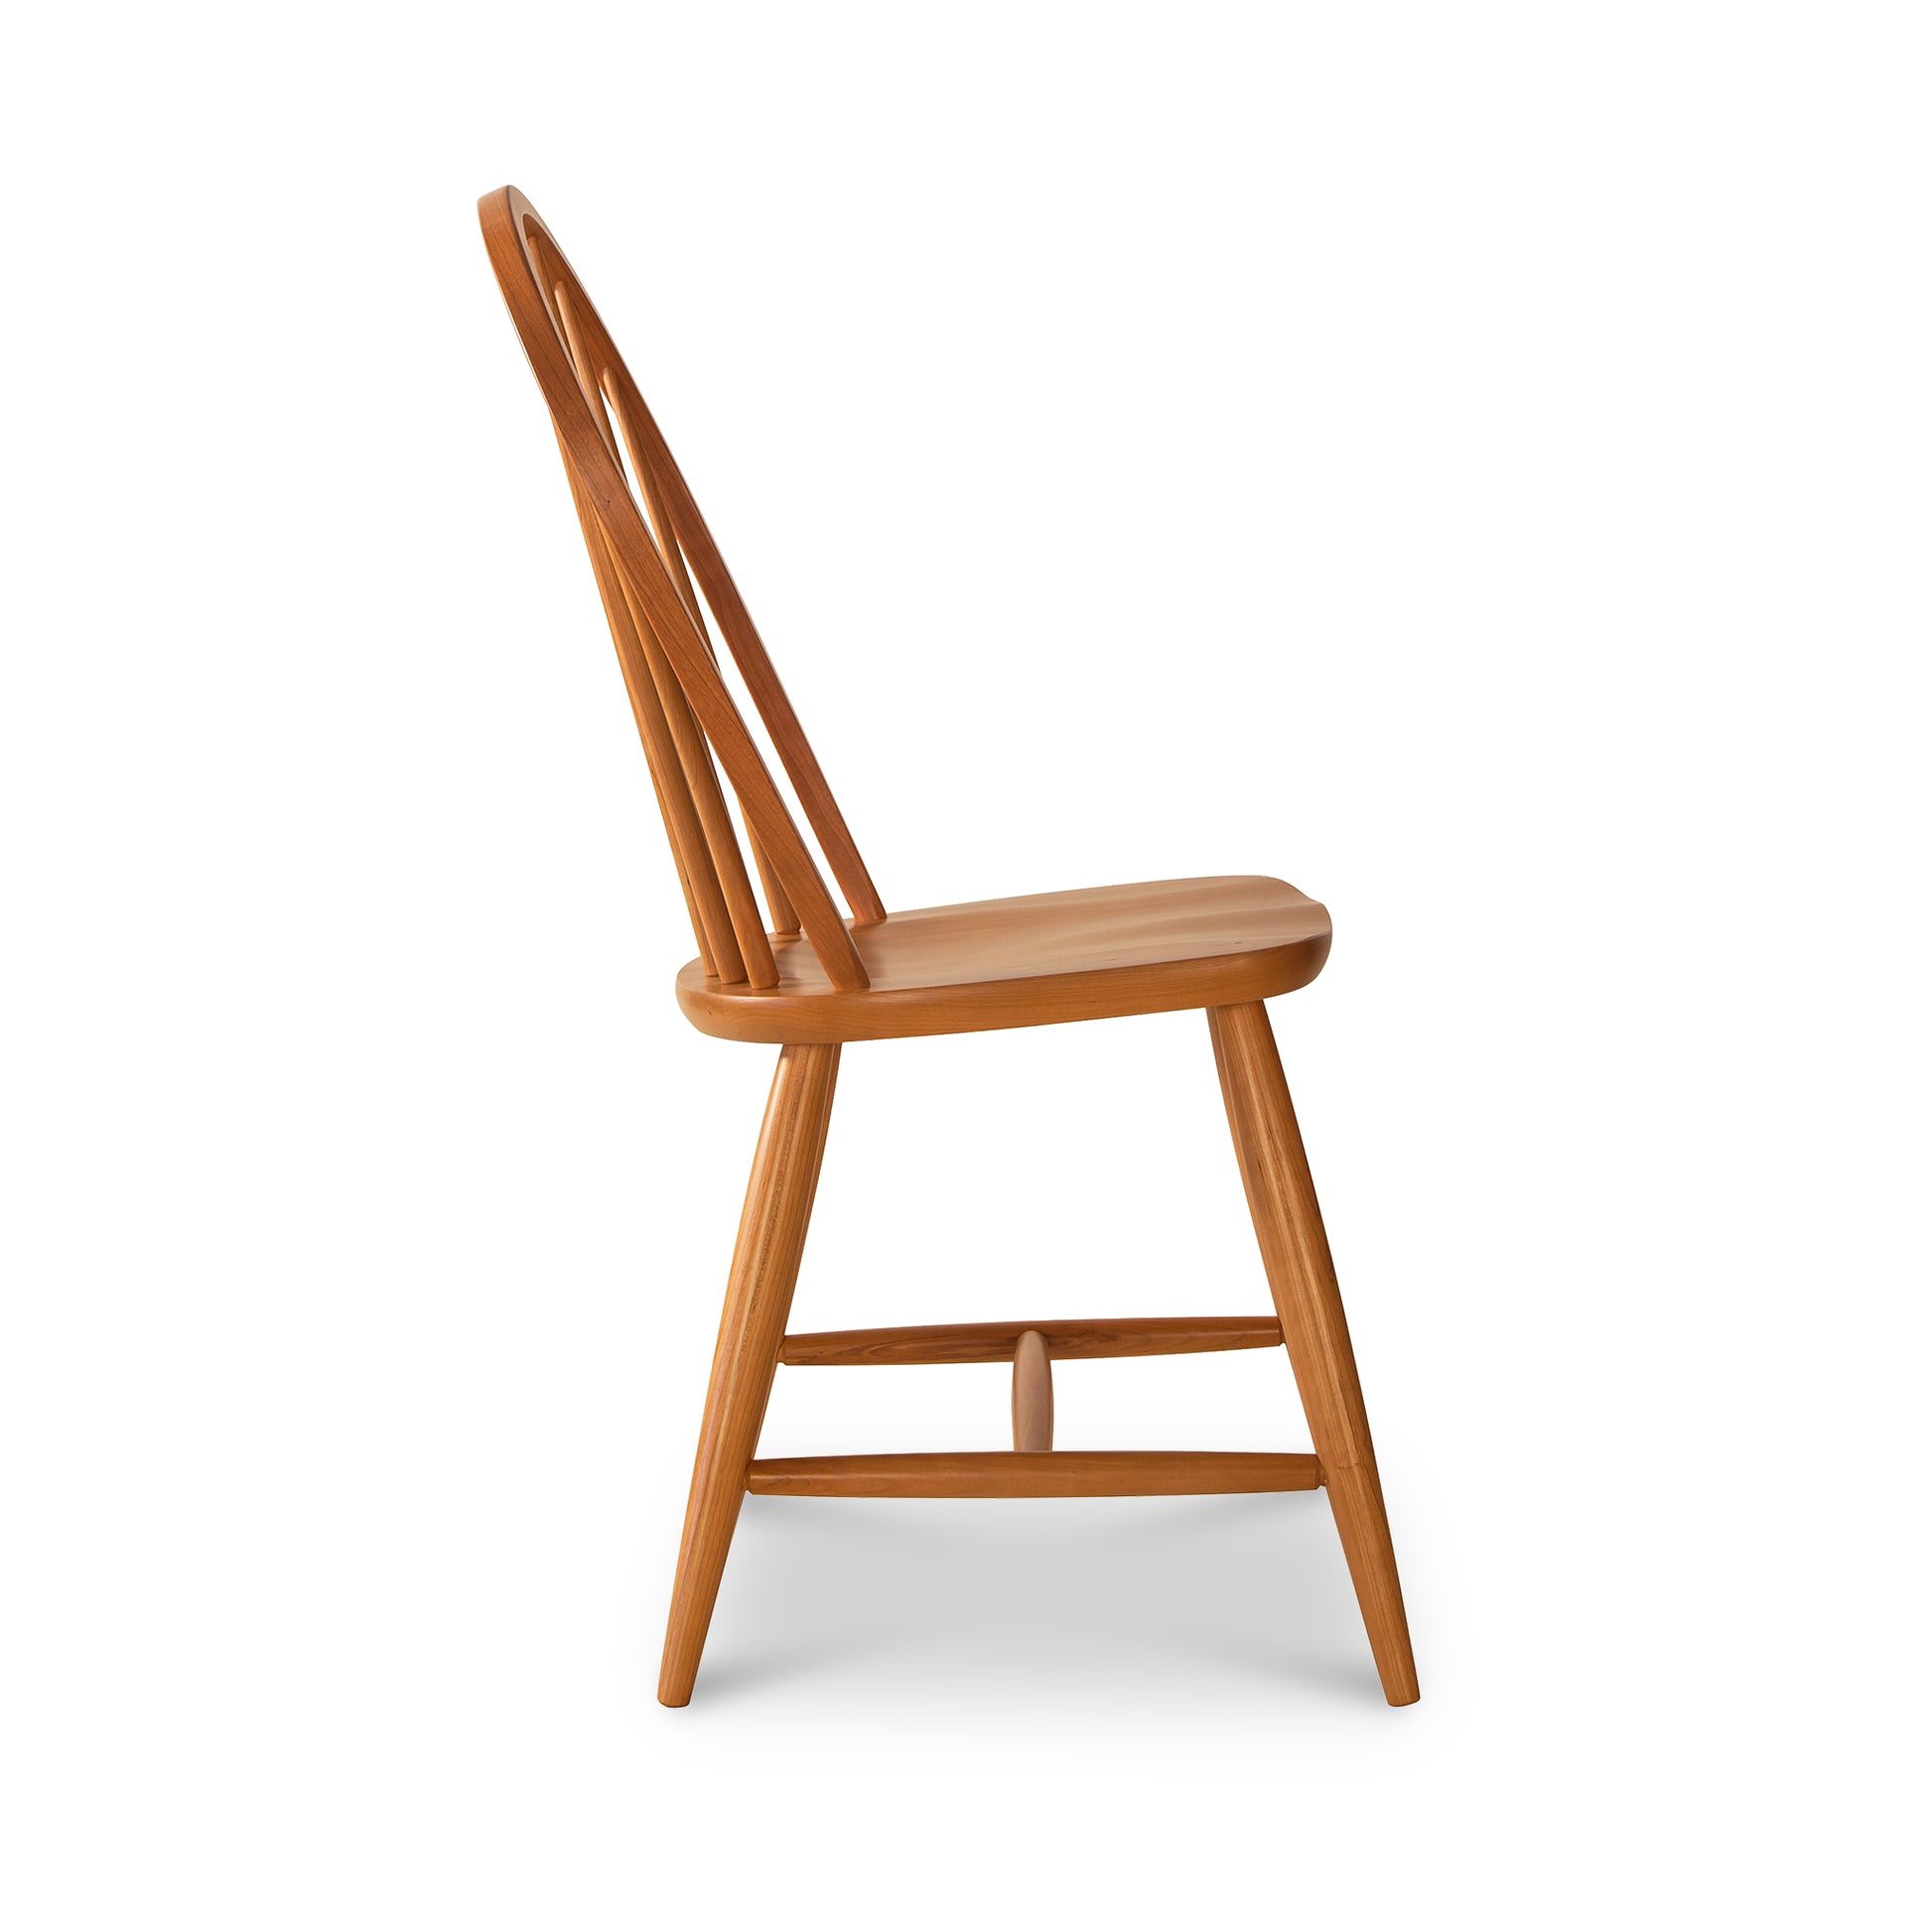 A Lyndon Furniture Contemporary Windsor Chair on a white background.